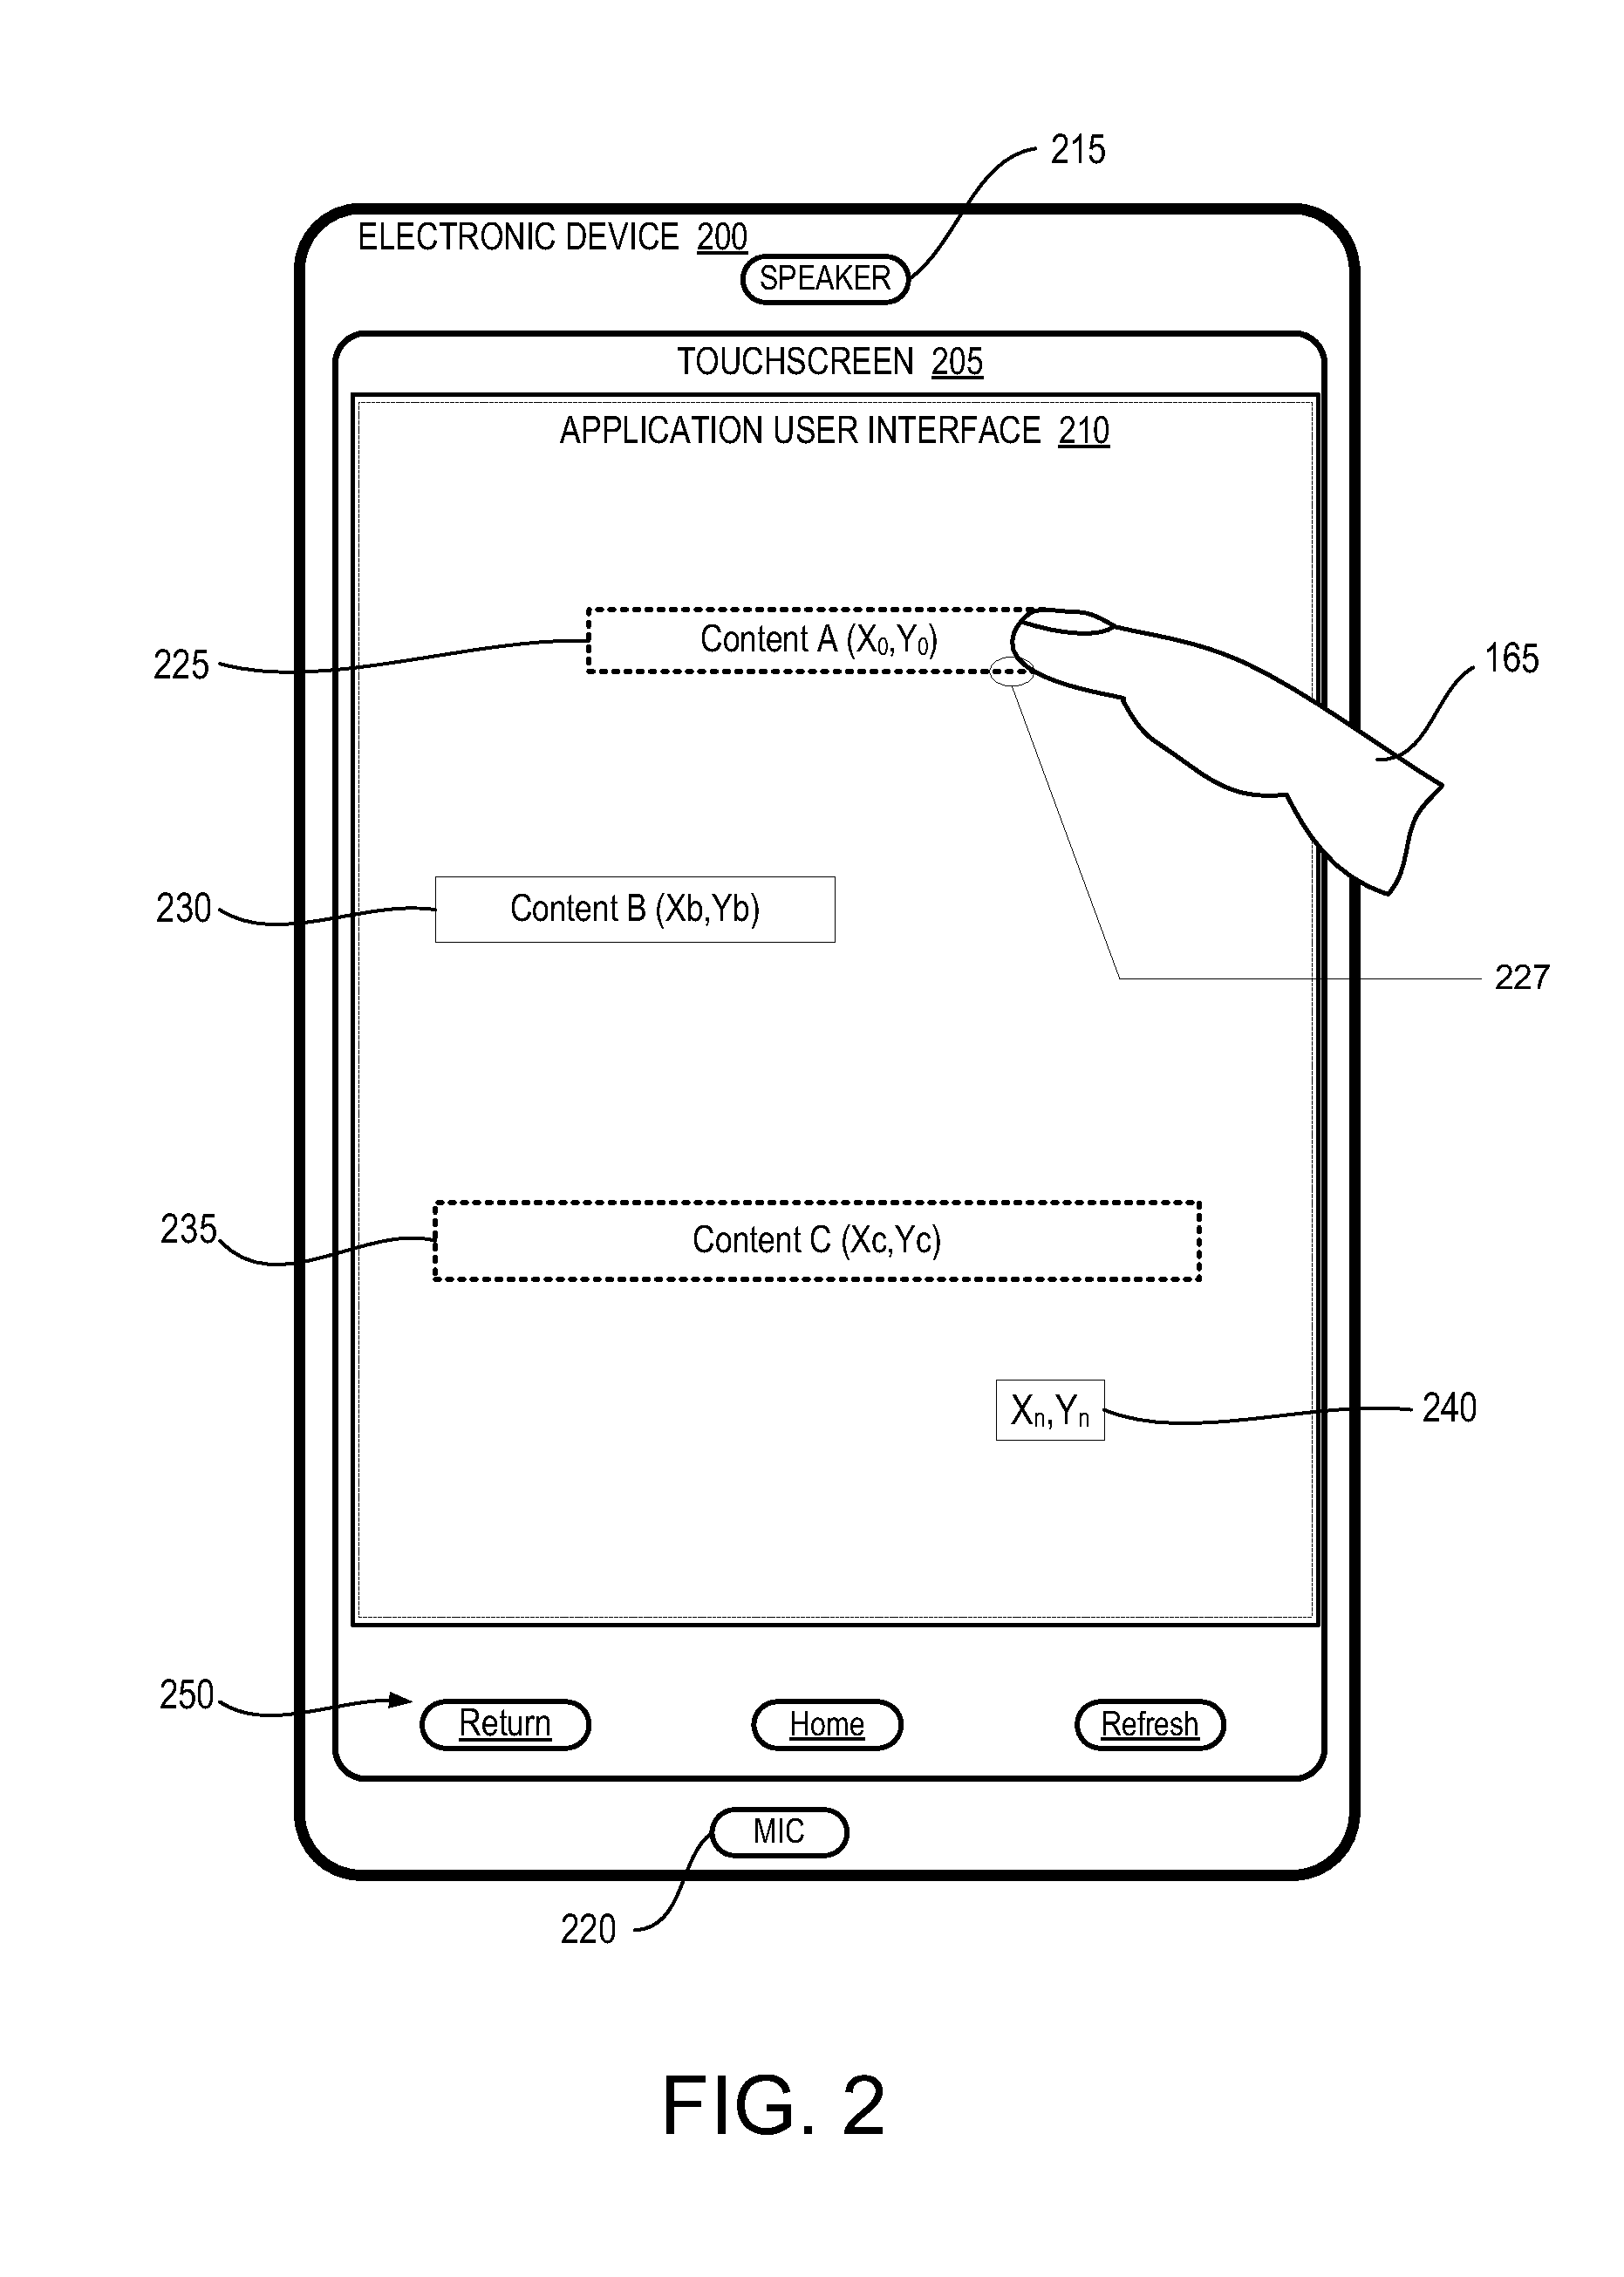 Method and Device to Reduce Swipe Latency